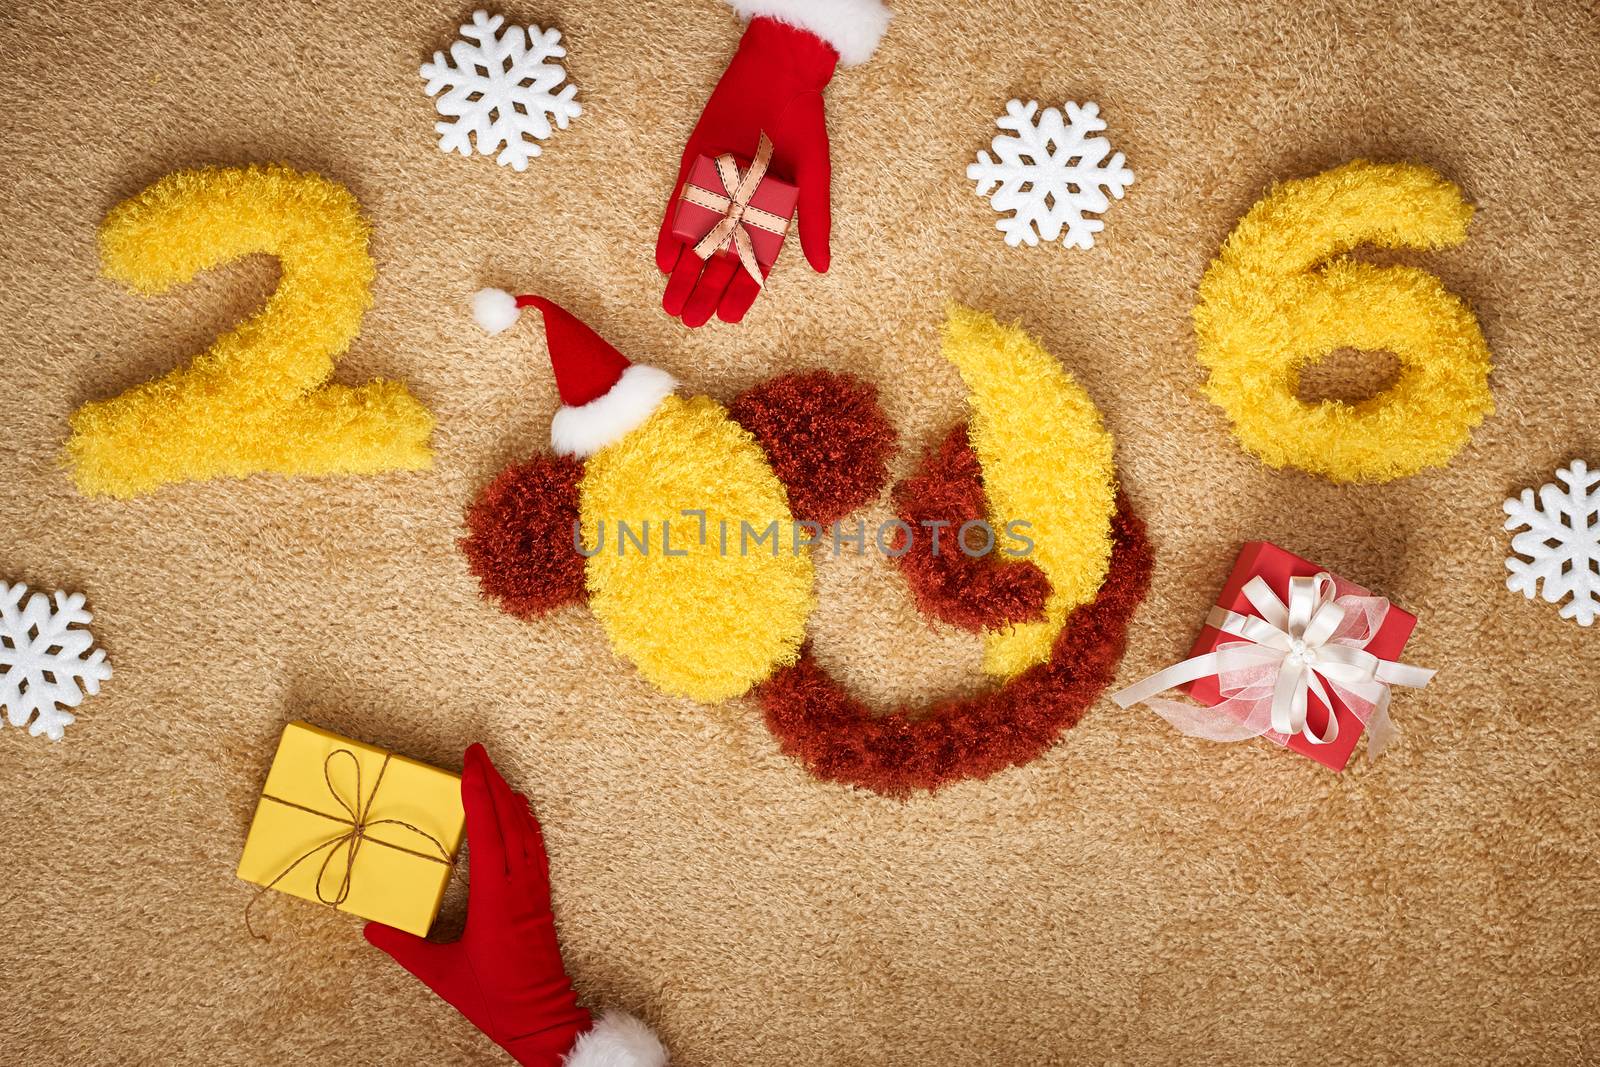 New Year 2016. Christmas.Funny monkey in Santa hat and banana,presents,snowflakes.Happy festive still life,yellow digits handmade, hands in red gloves.Party decoration, unusual holiday card, copyspace